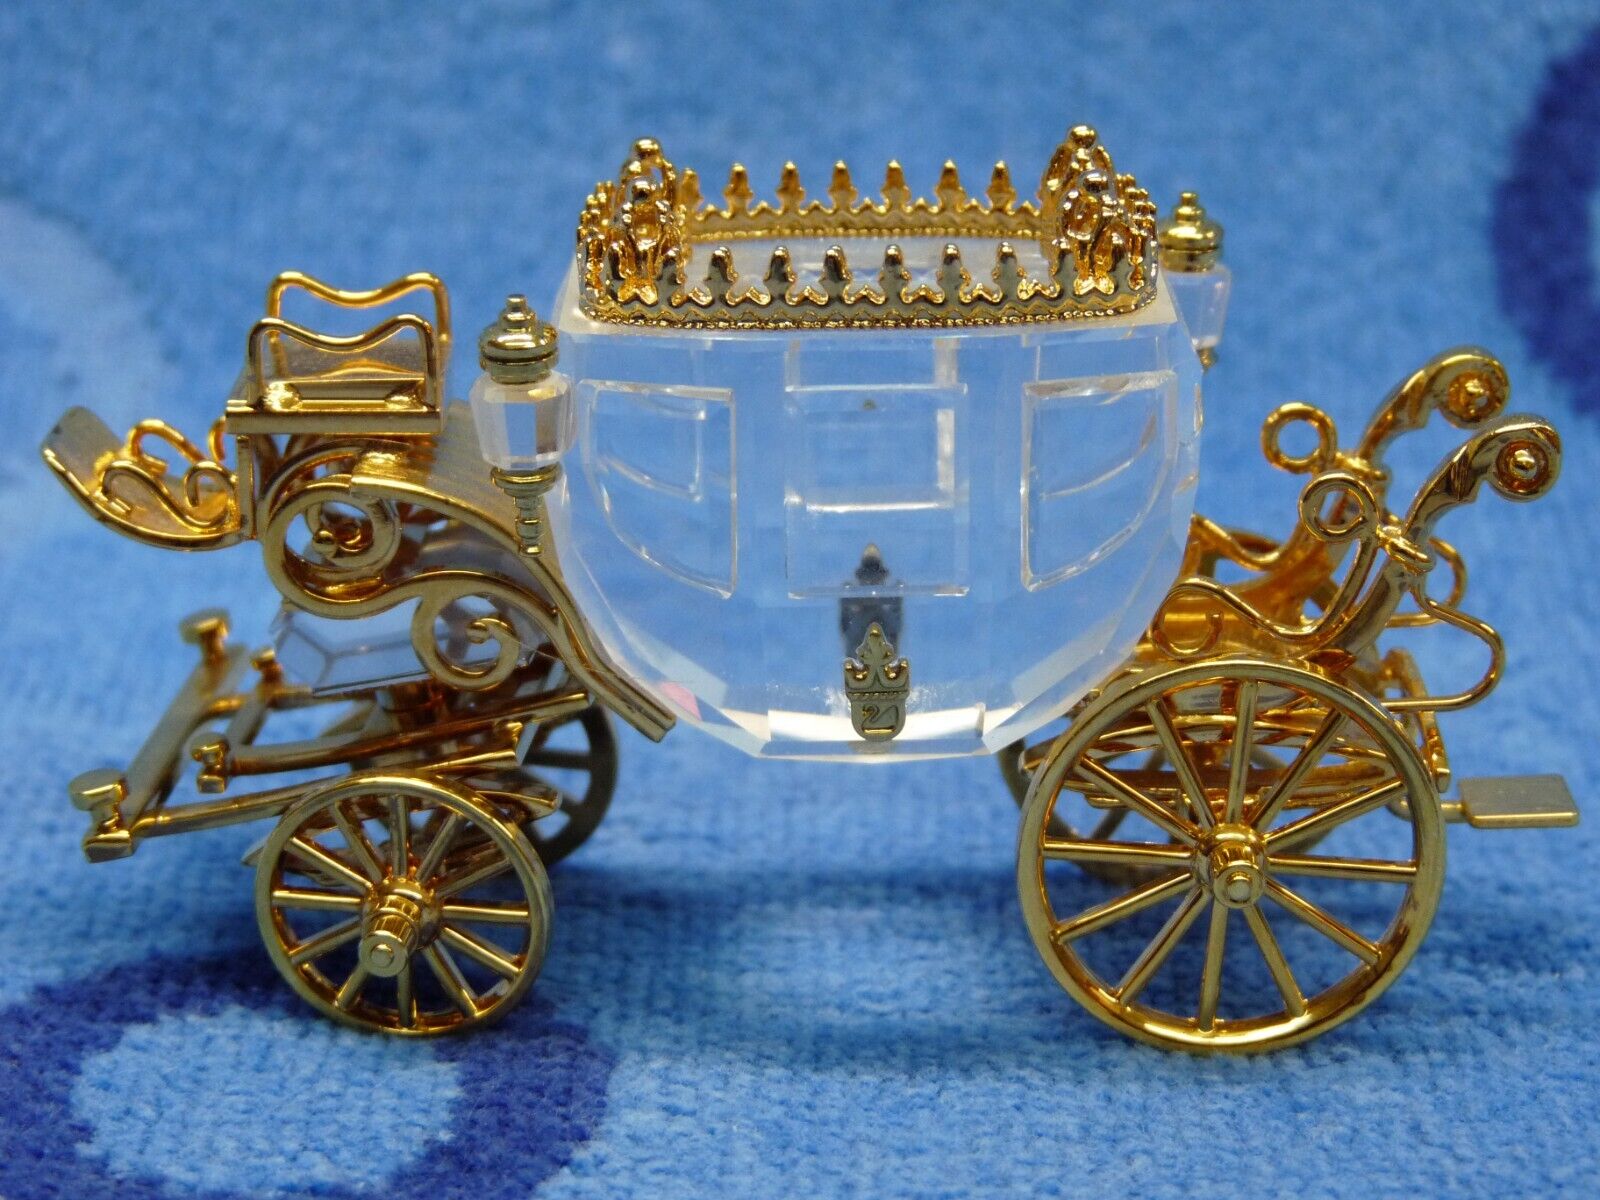 Swarovski Crystal and Gold Carriage Journeys Memories Collection